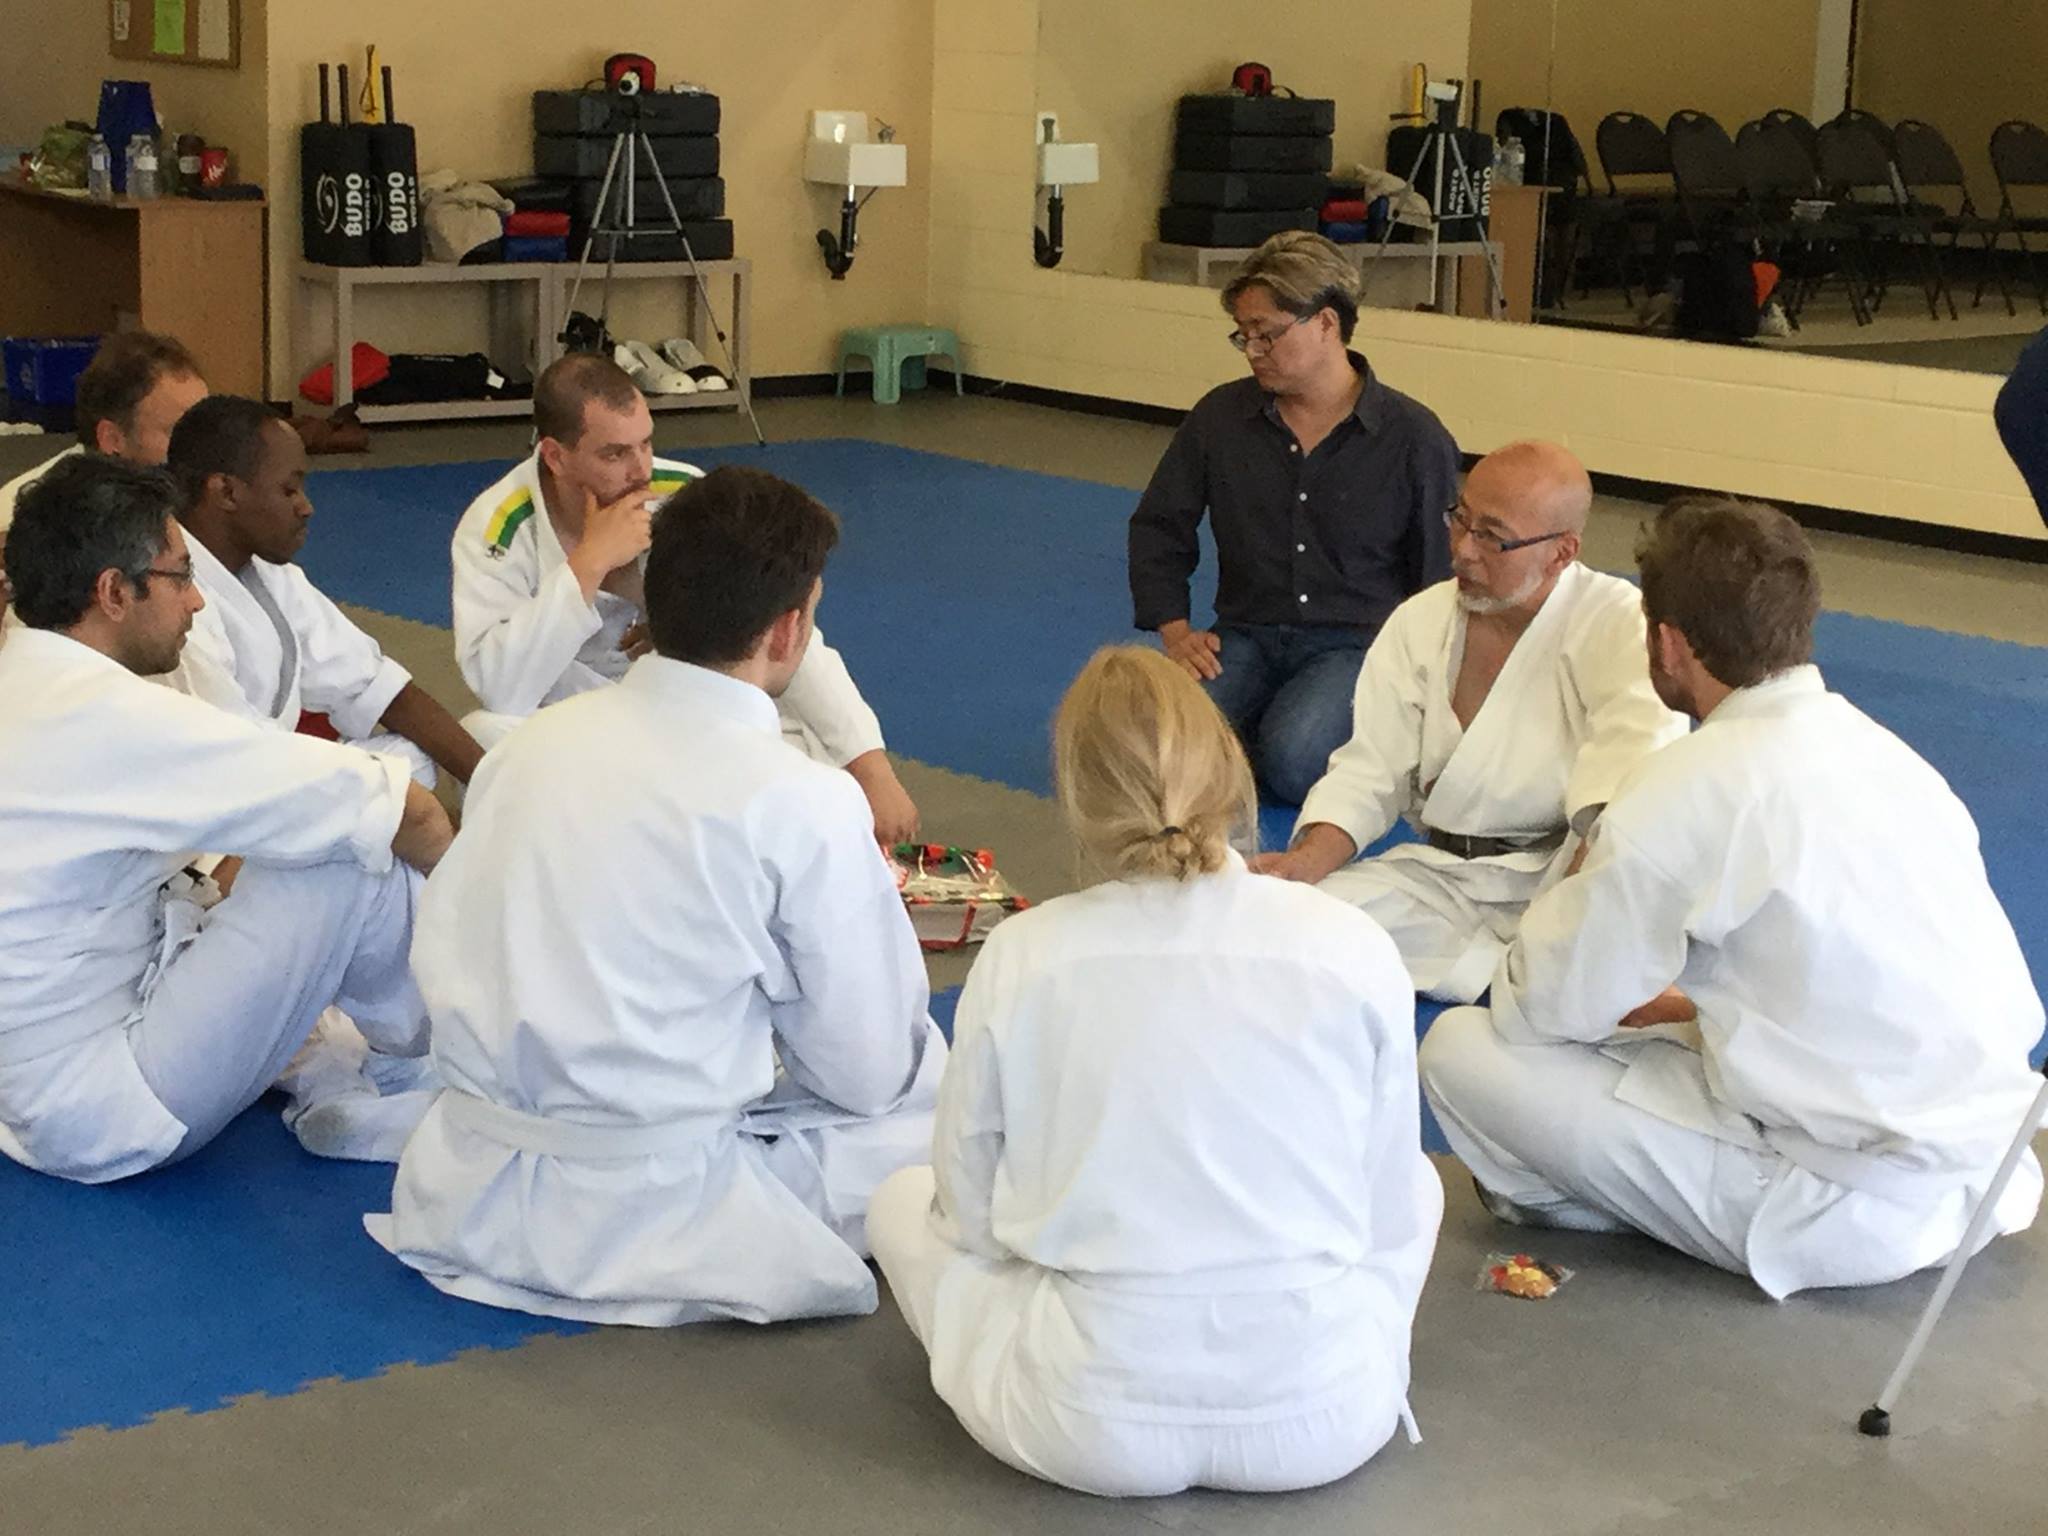 Sensei talks to the group about the history and philosophy of Yagyu Shingan Ryu